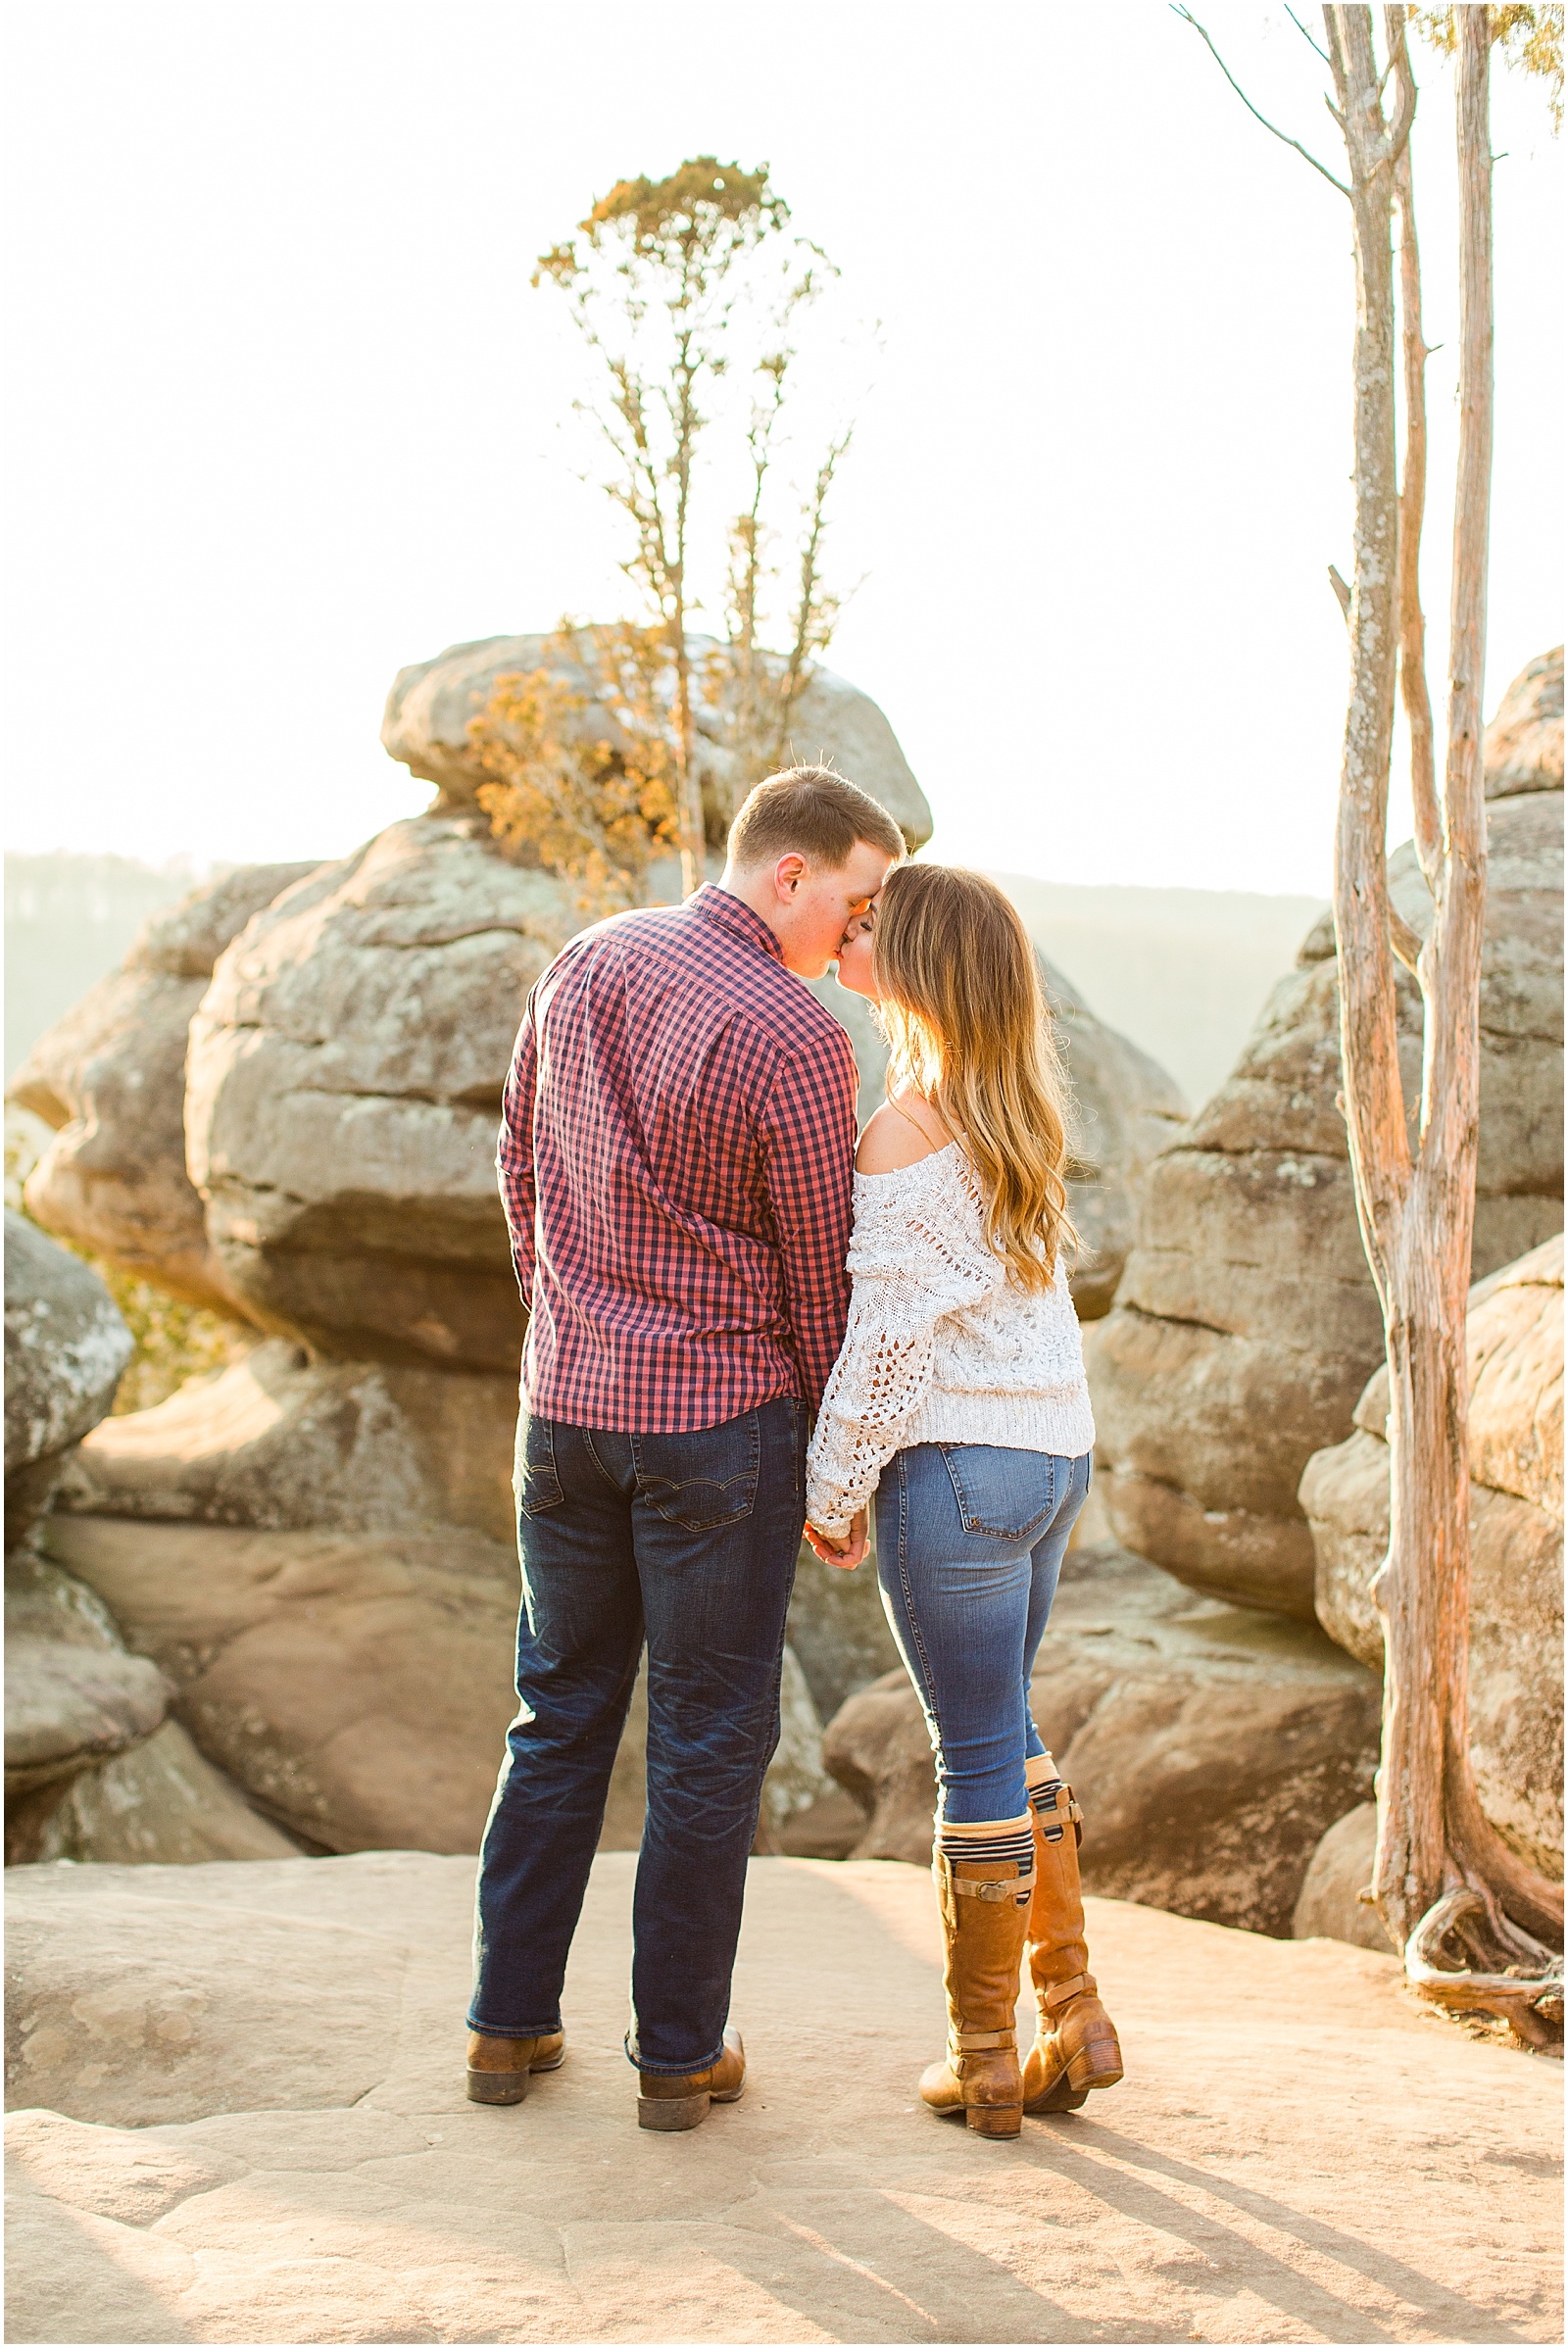 A Sunny Garden of the Gods Engagement Session | Shiloh and Lee | Bret and Brandie Photography059.jpg